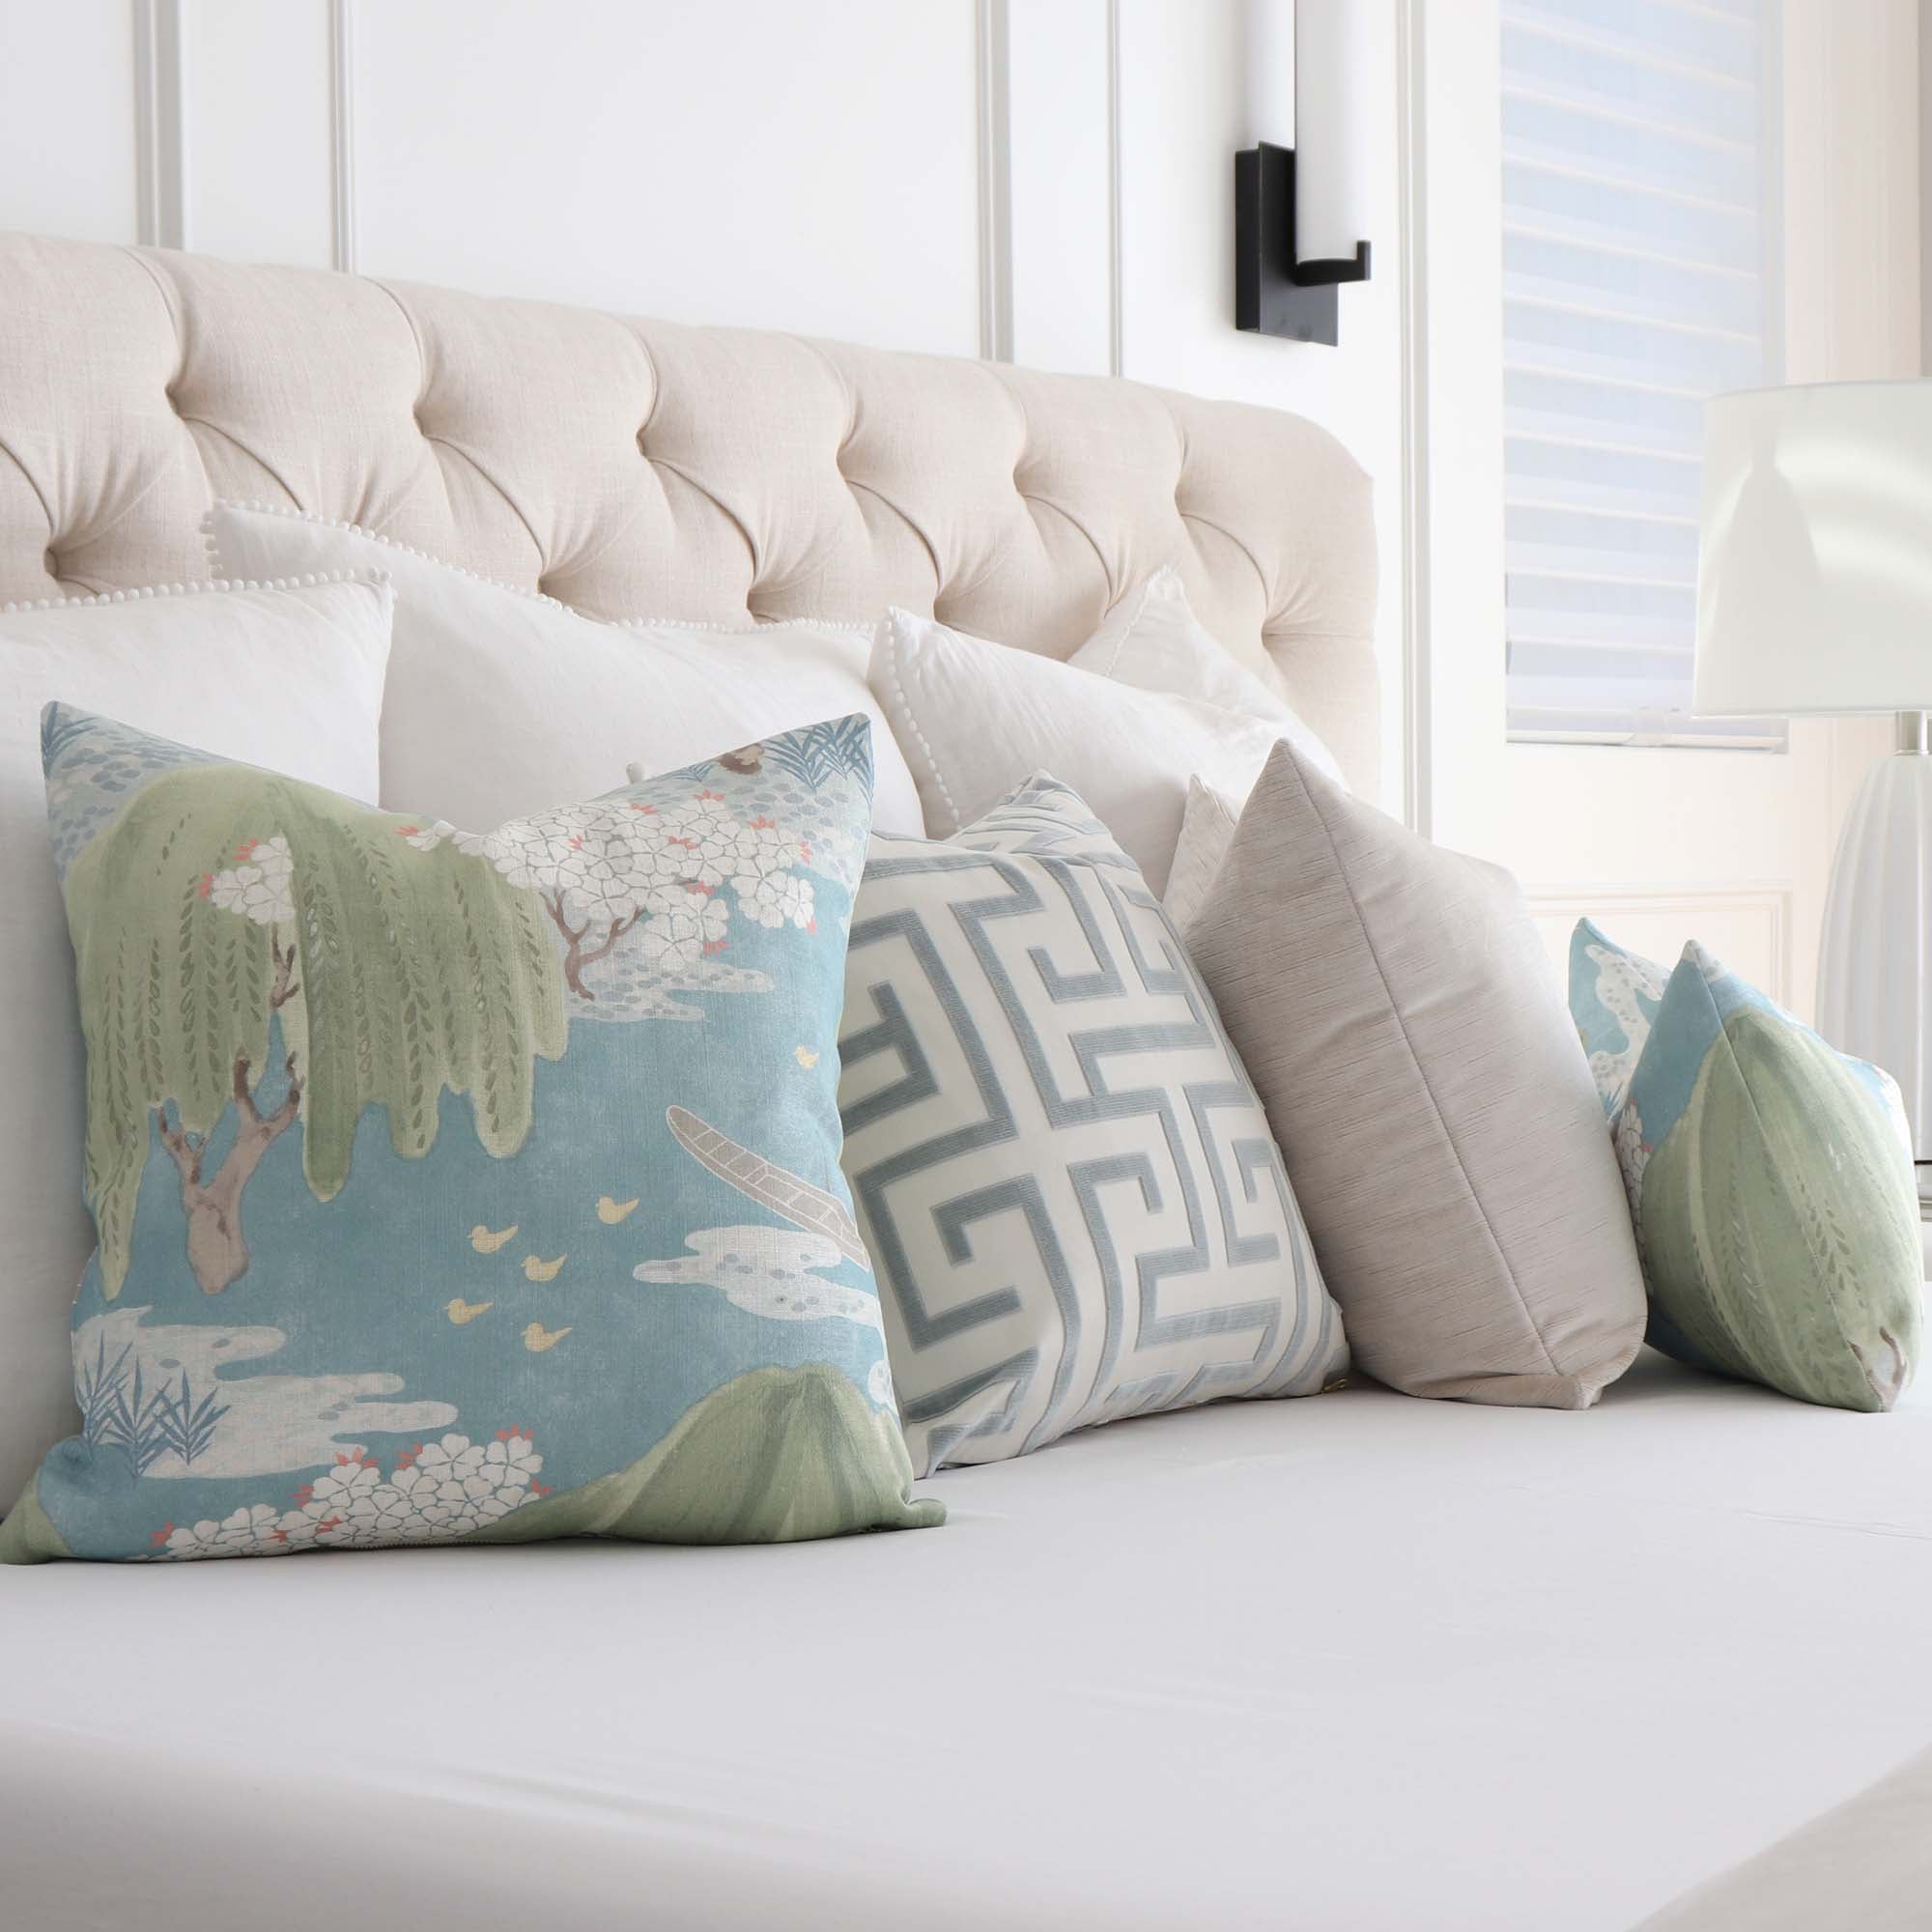 Turquoise Chevron Mudcloth Pillow Cover, –